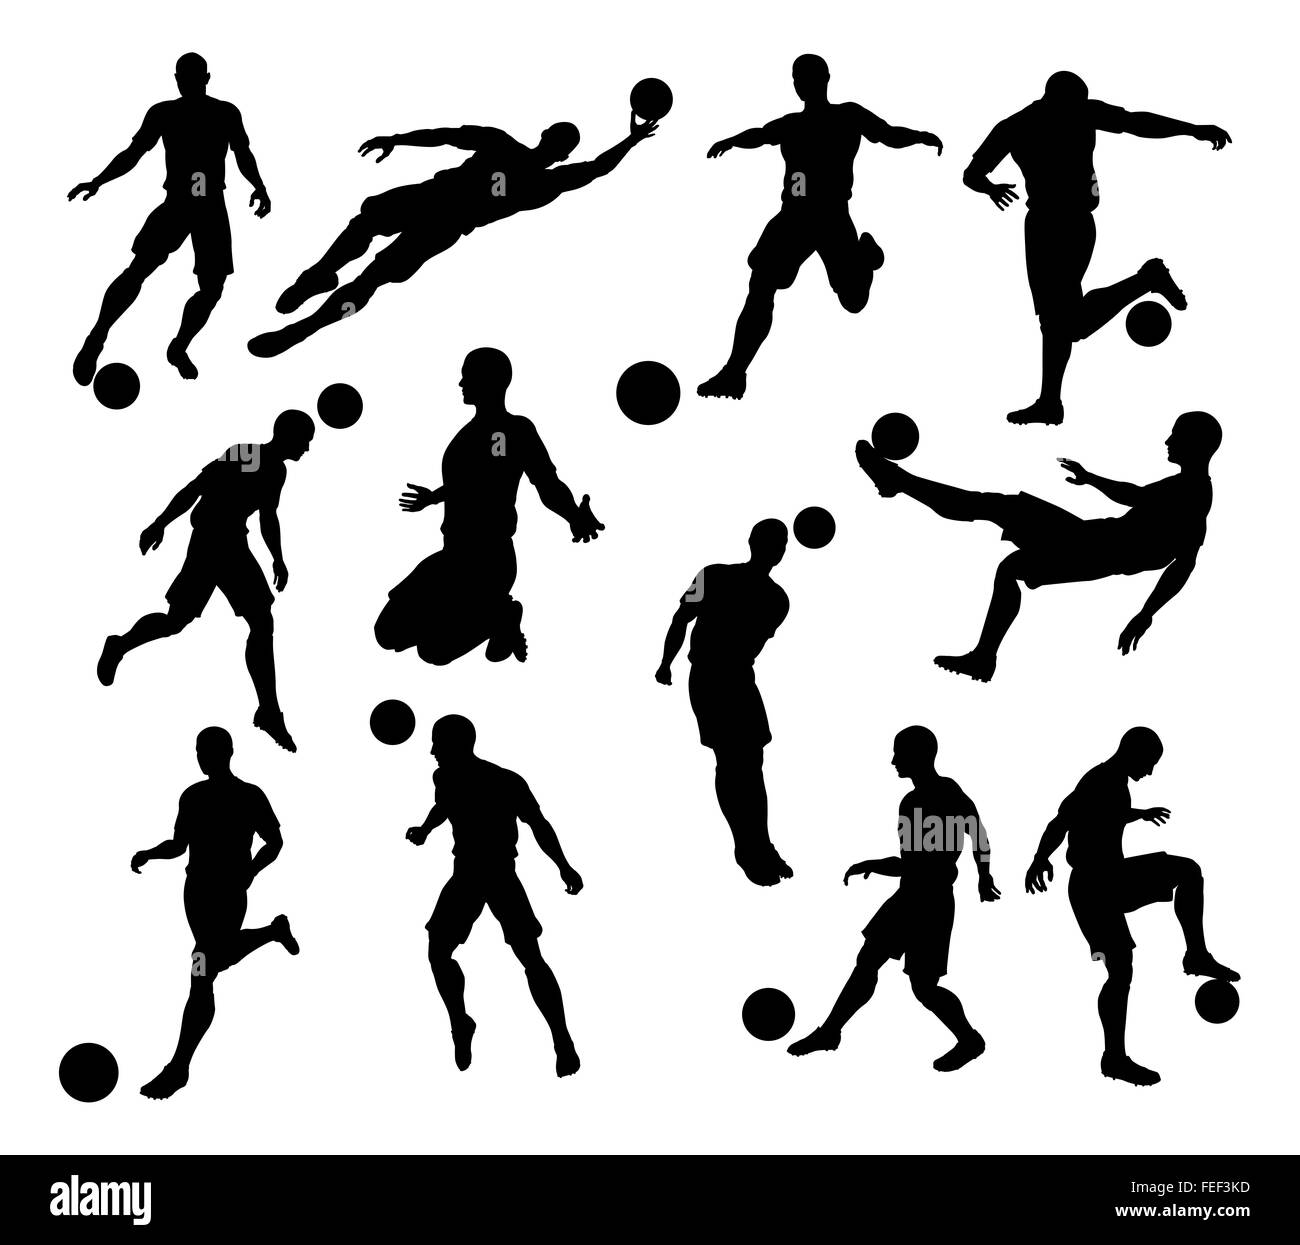 A set of Silhouette Soccer Players in lots of different poses Stock Photo